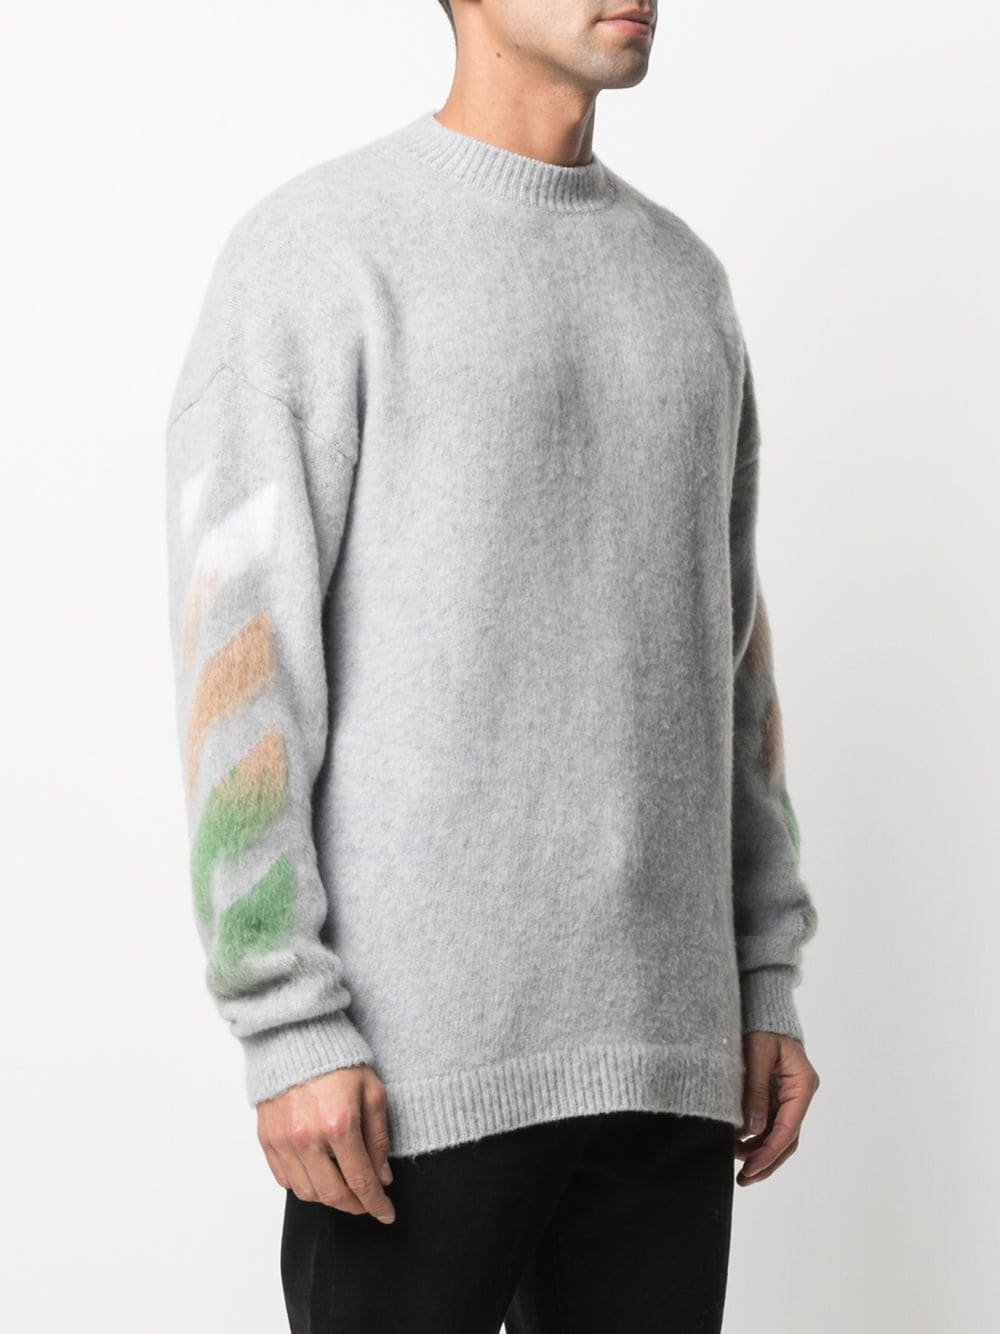 Diag brushed crew neck silver